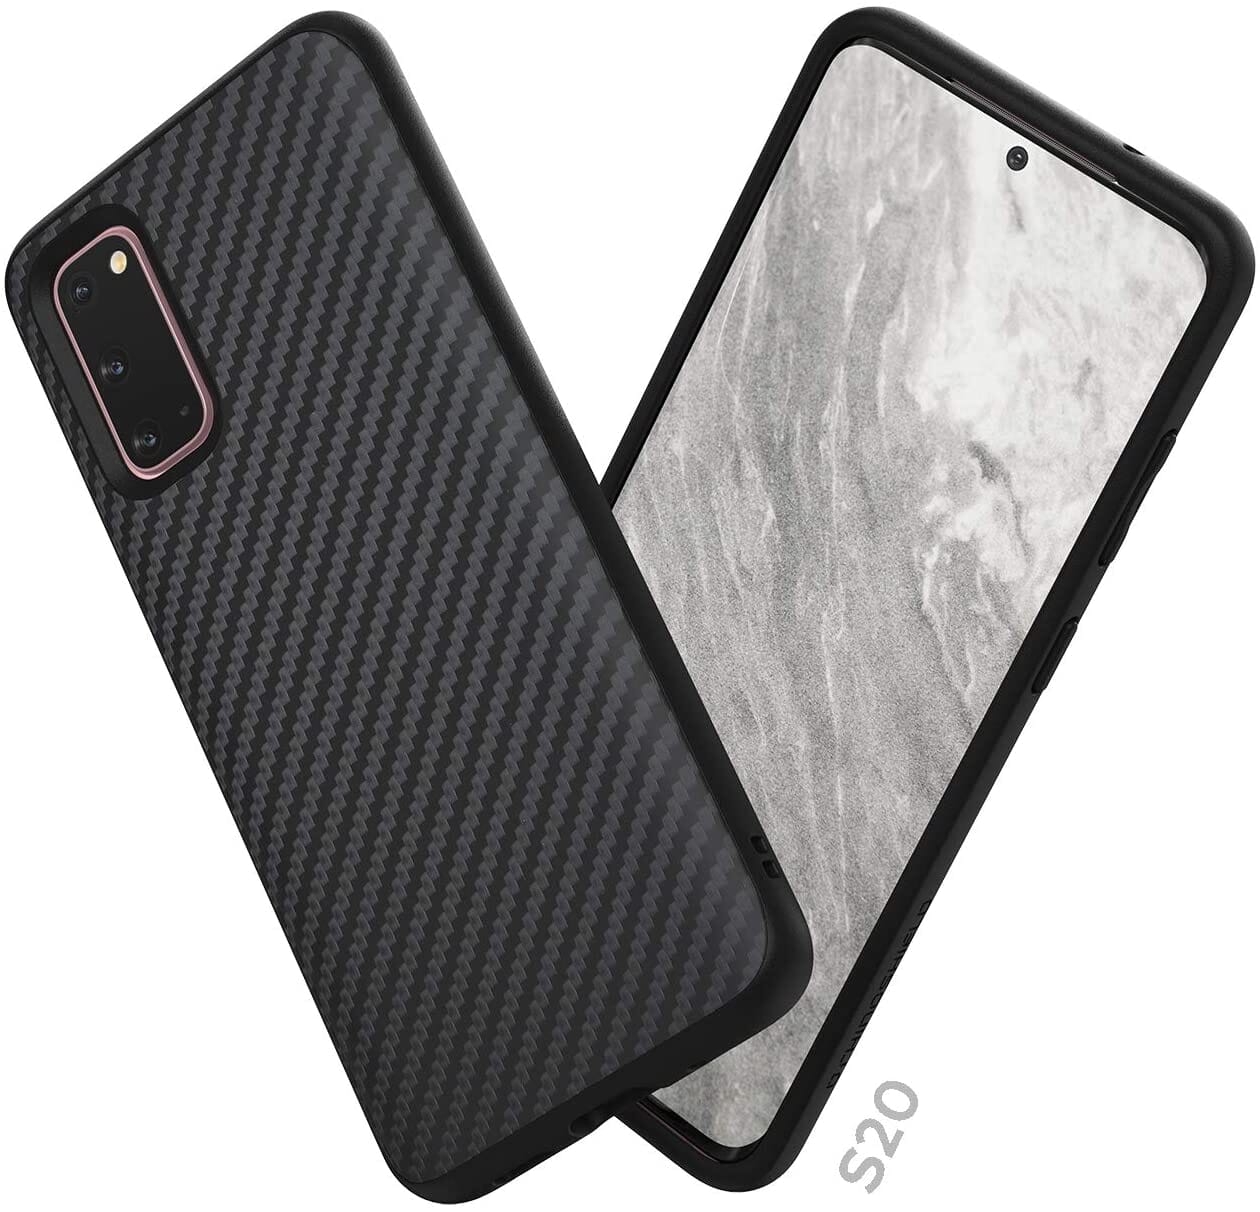 RhinoShield SolidSuit Protective Case with Premium Finish for Samsung Galaxy S20 Series Samsung S20 Series RhinoShield Carbon Fiber Samsung Galaxy S20 